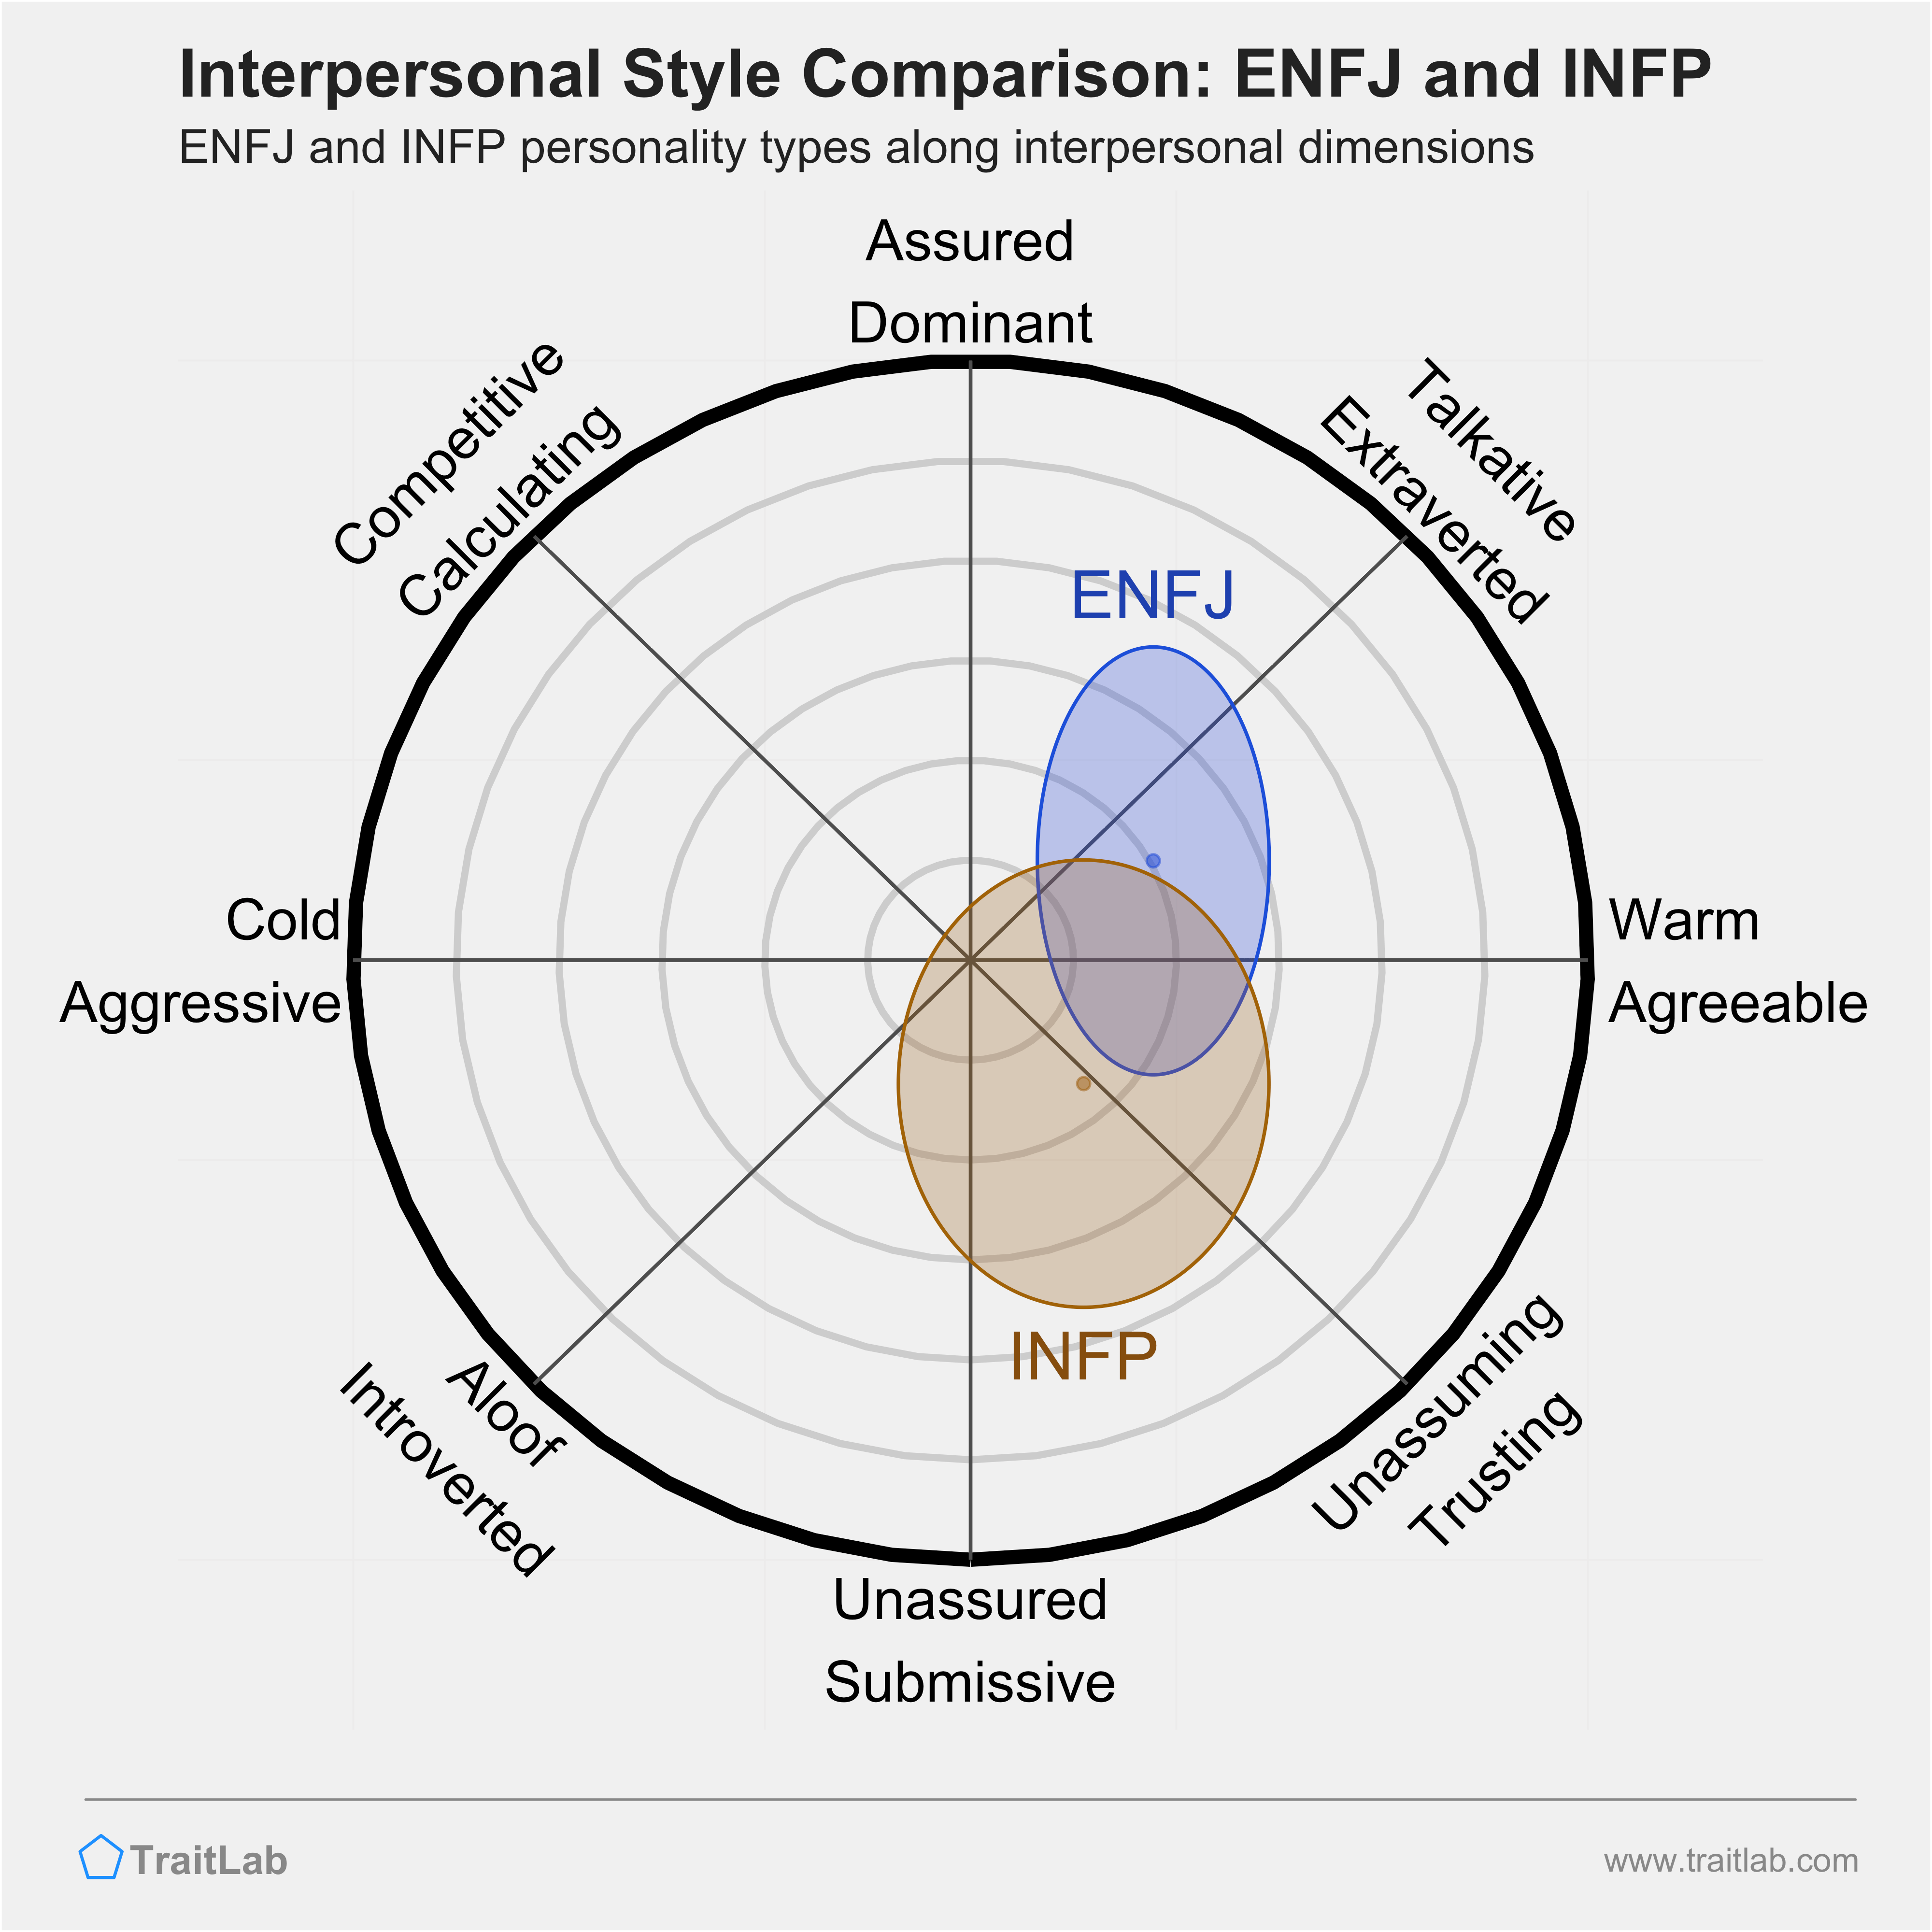 ENFJ and INFP comparison across interpersonal dimensions